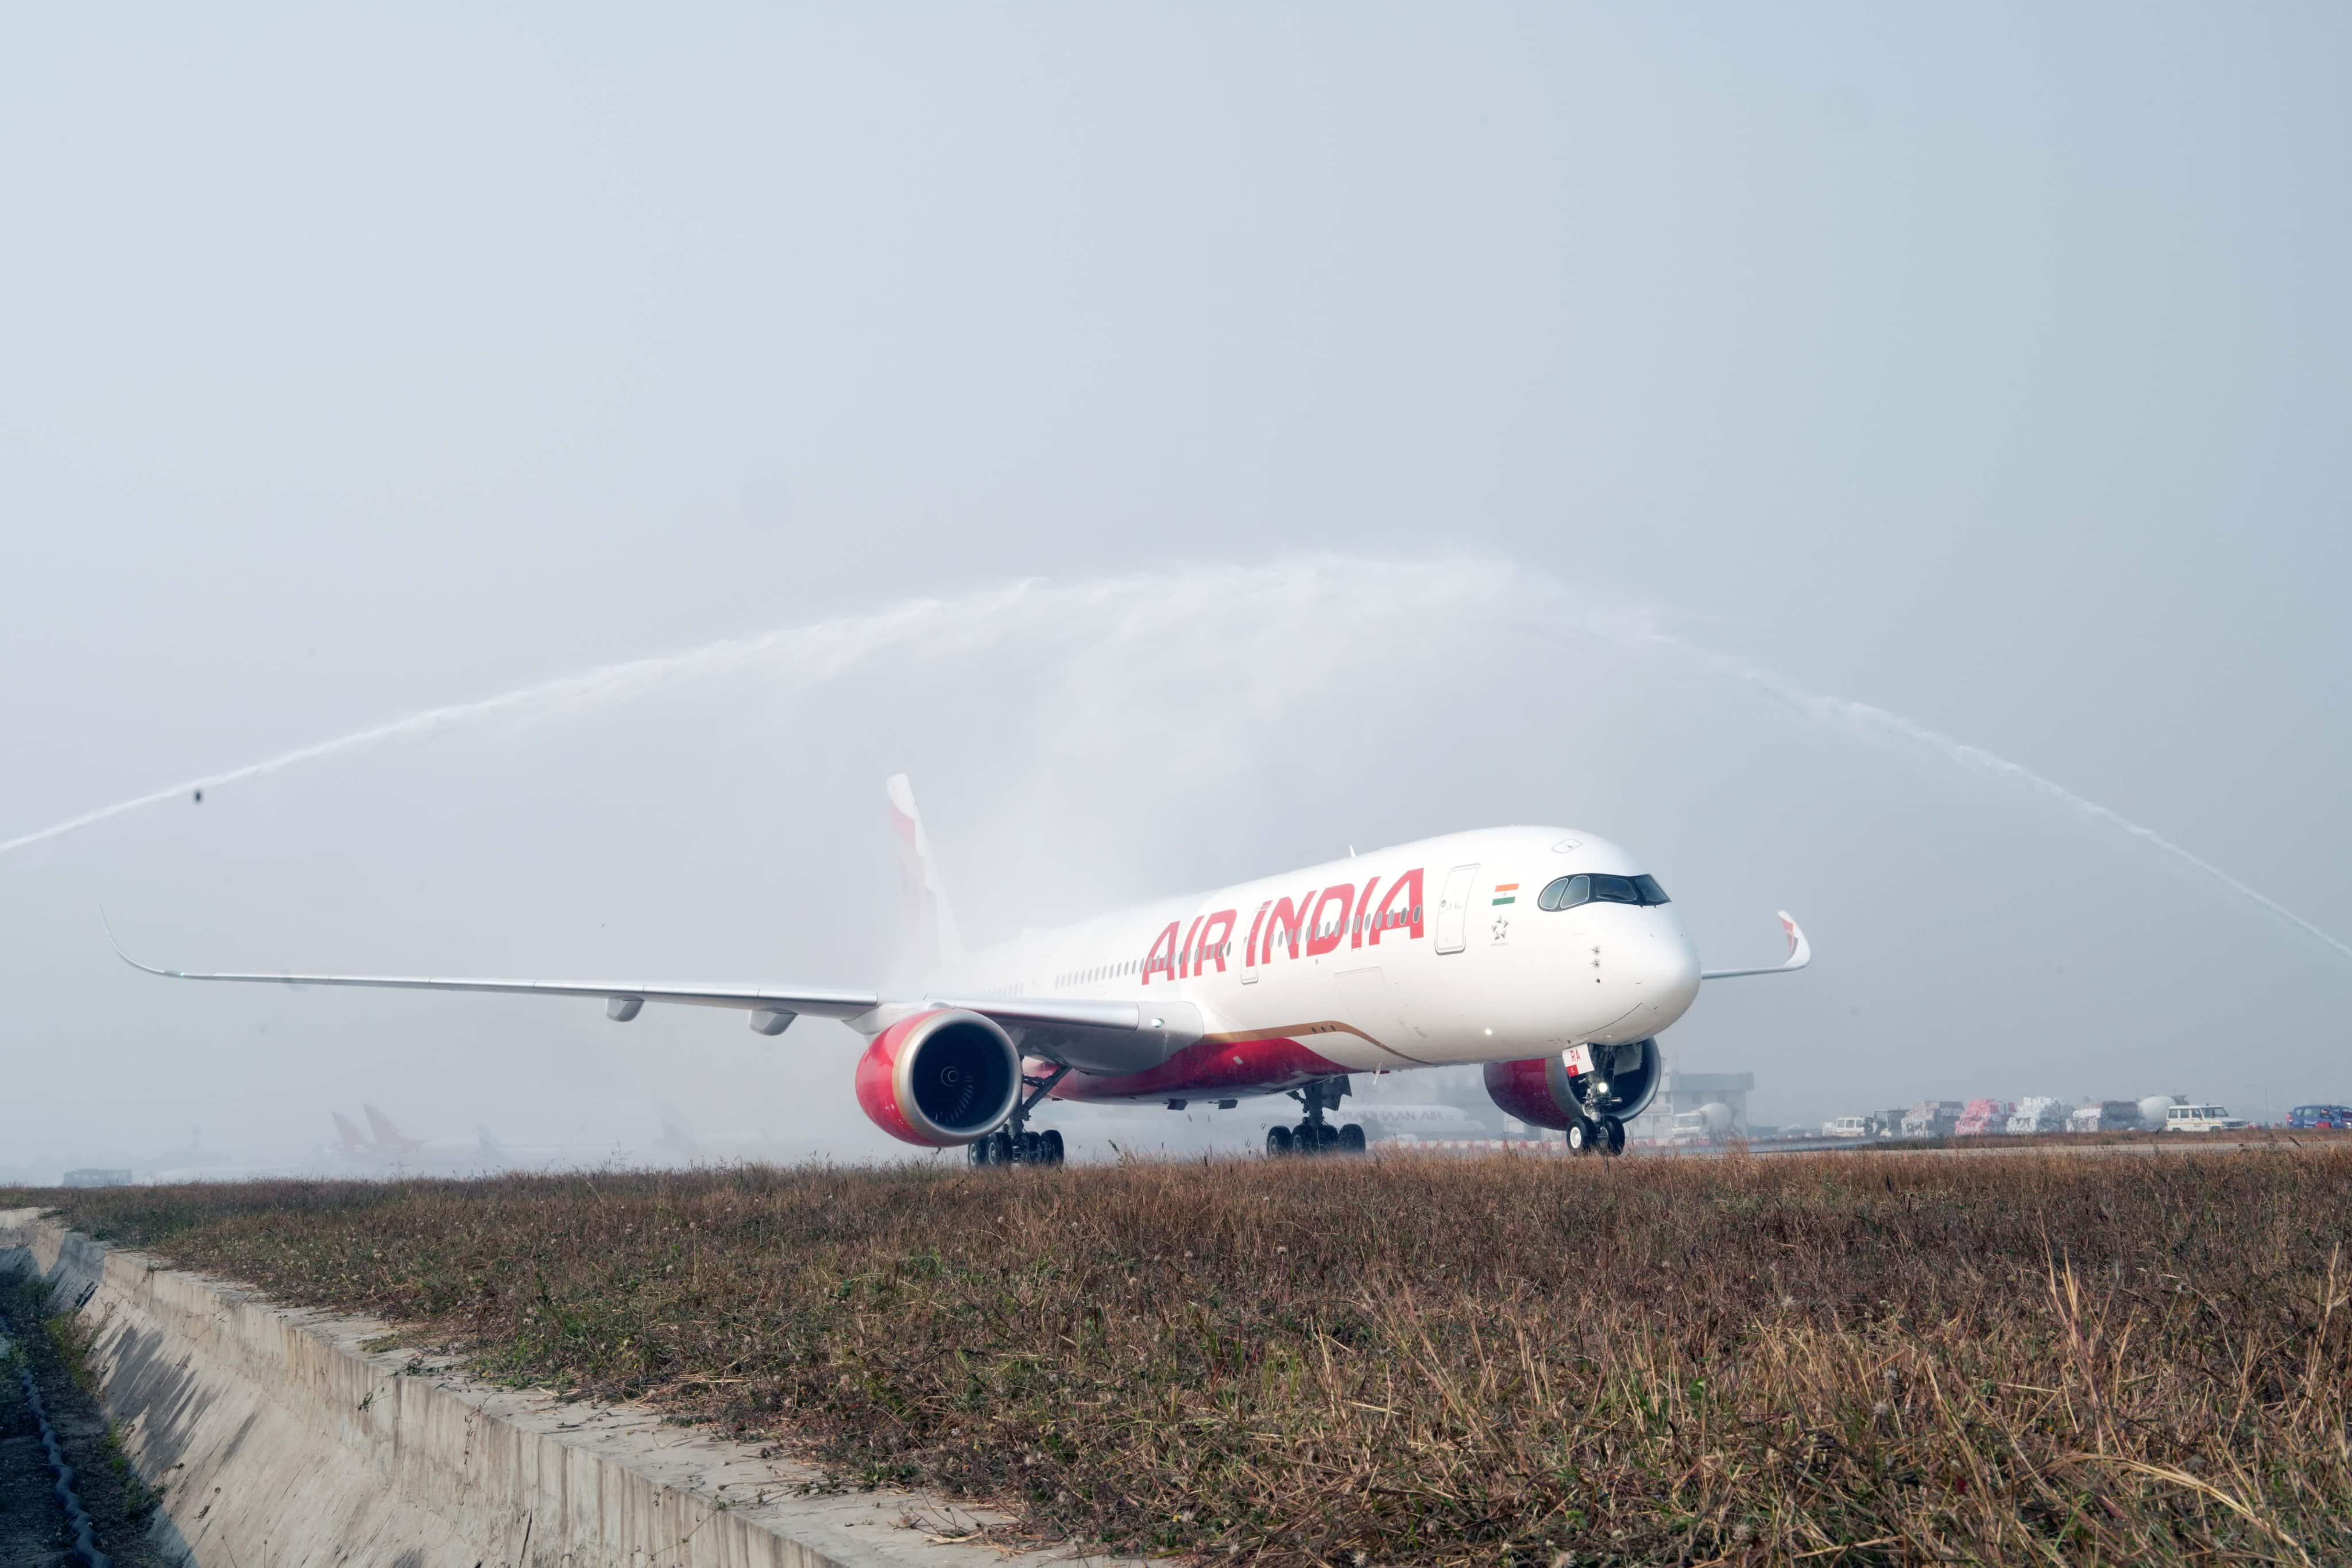 Air India to operate A350 planes on Delhi-London route starting September 1